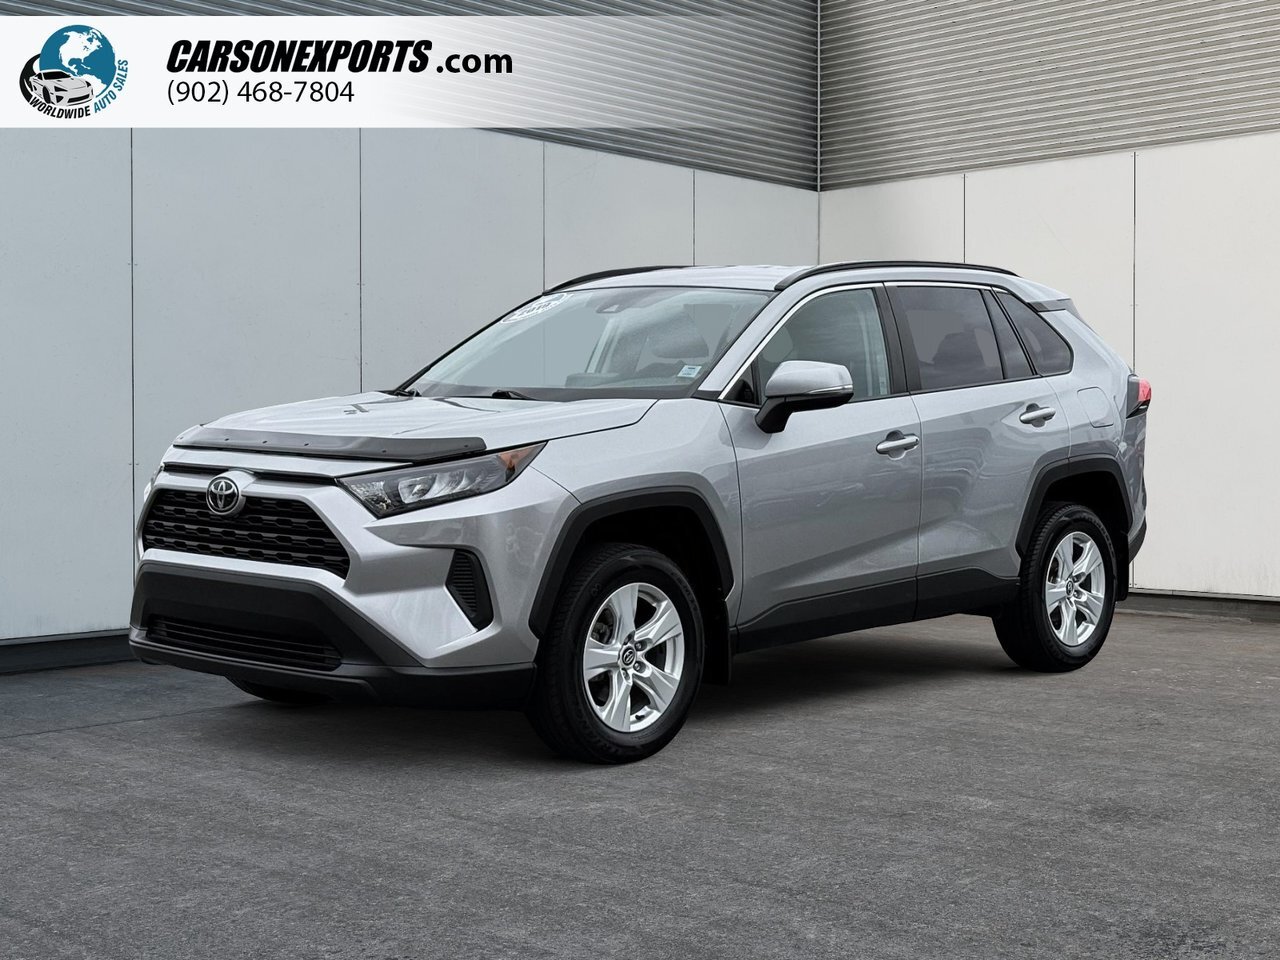 2019 Toyota RAV4 LE The best place to buy a used car. Period.